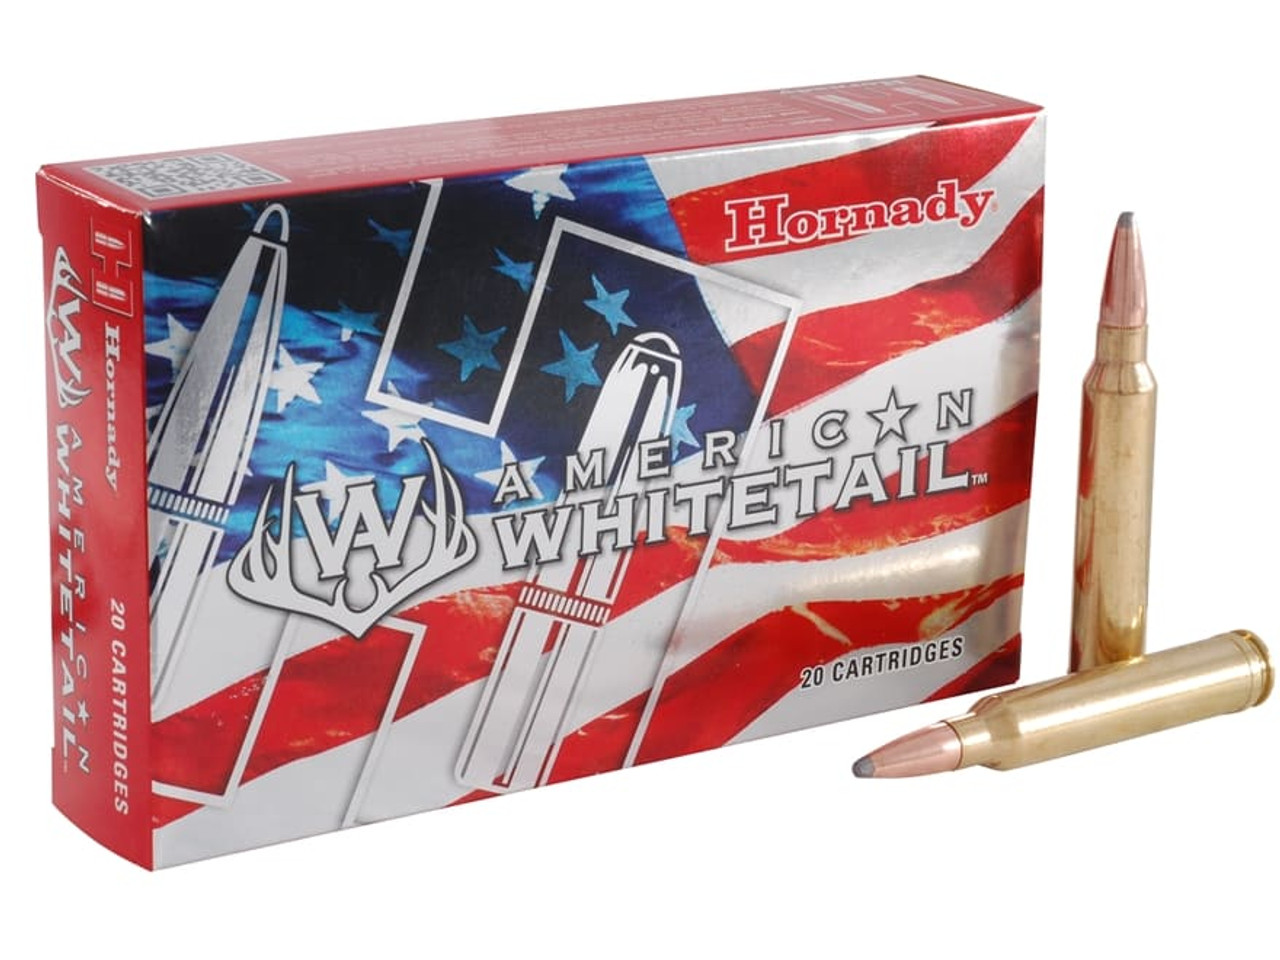 Opening day of deer season comes only once a year. Make sure you're ready when the big one steps out and load-up with Hornady® American Whitetail® ammunition.

Loaded with our legendary Hornady® InterLock® bullets in weights that have been deer hunting favorites for decades, American Whitetail® ammunition combines generations of ballistics know-how with modern components and the technology you need to take the buck of a lifetime!



INTERLOCK® BULLETS
InterLock® bullets feature exposed lead tips for controlled expansion and hard-hitting terminal performance. Bullets used in American Whitetail® ammunition feature our pioneering secant ogive design and exclusive InterLock® ring — a raised ring inside the jacket that is embedded in the bullet's core that keeps the core and jacket locked together during expansion to retain mass and energy.

POWDERS
Loaded to conventional velocities, powder is matched to each load for optimum pressure and consistency, ensuring each load is compatible with semi-autos as well.

CASE AND PRIMER
Like all Hornady® ammunition, our American Whitetail® rounds use the highest quality cases and primers available. Consistent components translate to consistent shooting in the field.

TEST BARREL (24")
MUZZLE
100 YARDS
200 YARDS
300 YARDS
400 YARDS
500 YARDS
 
VELOCITY
(FPS)
ENERGY
(FT/LB)
TRAJECTORY
(INCHES)
3275
3572
-1.5
2979
2955
1.2
2702
2432
0
2442
1986
-6
2197
1607
-17.8
1965
1286
-36.9